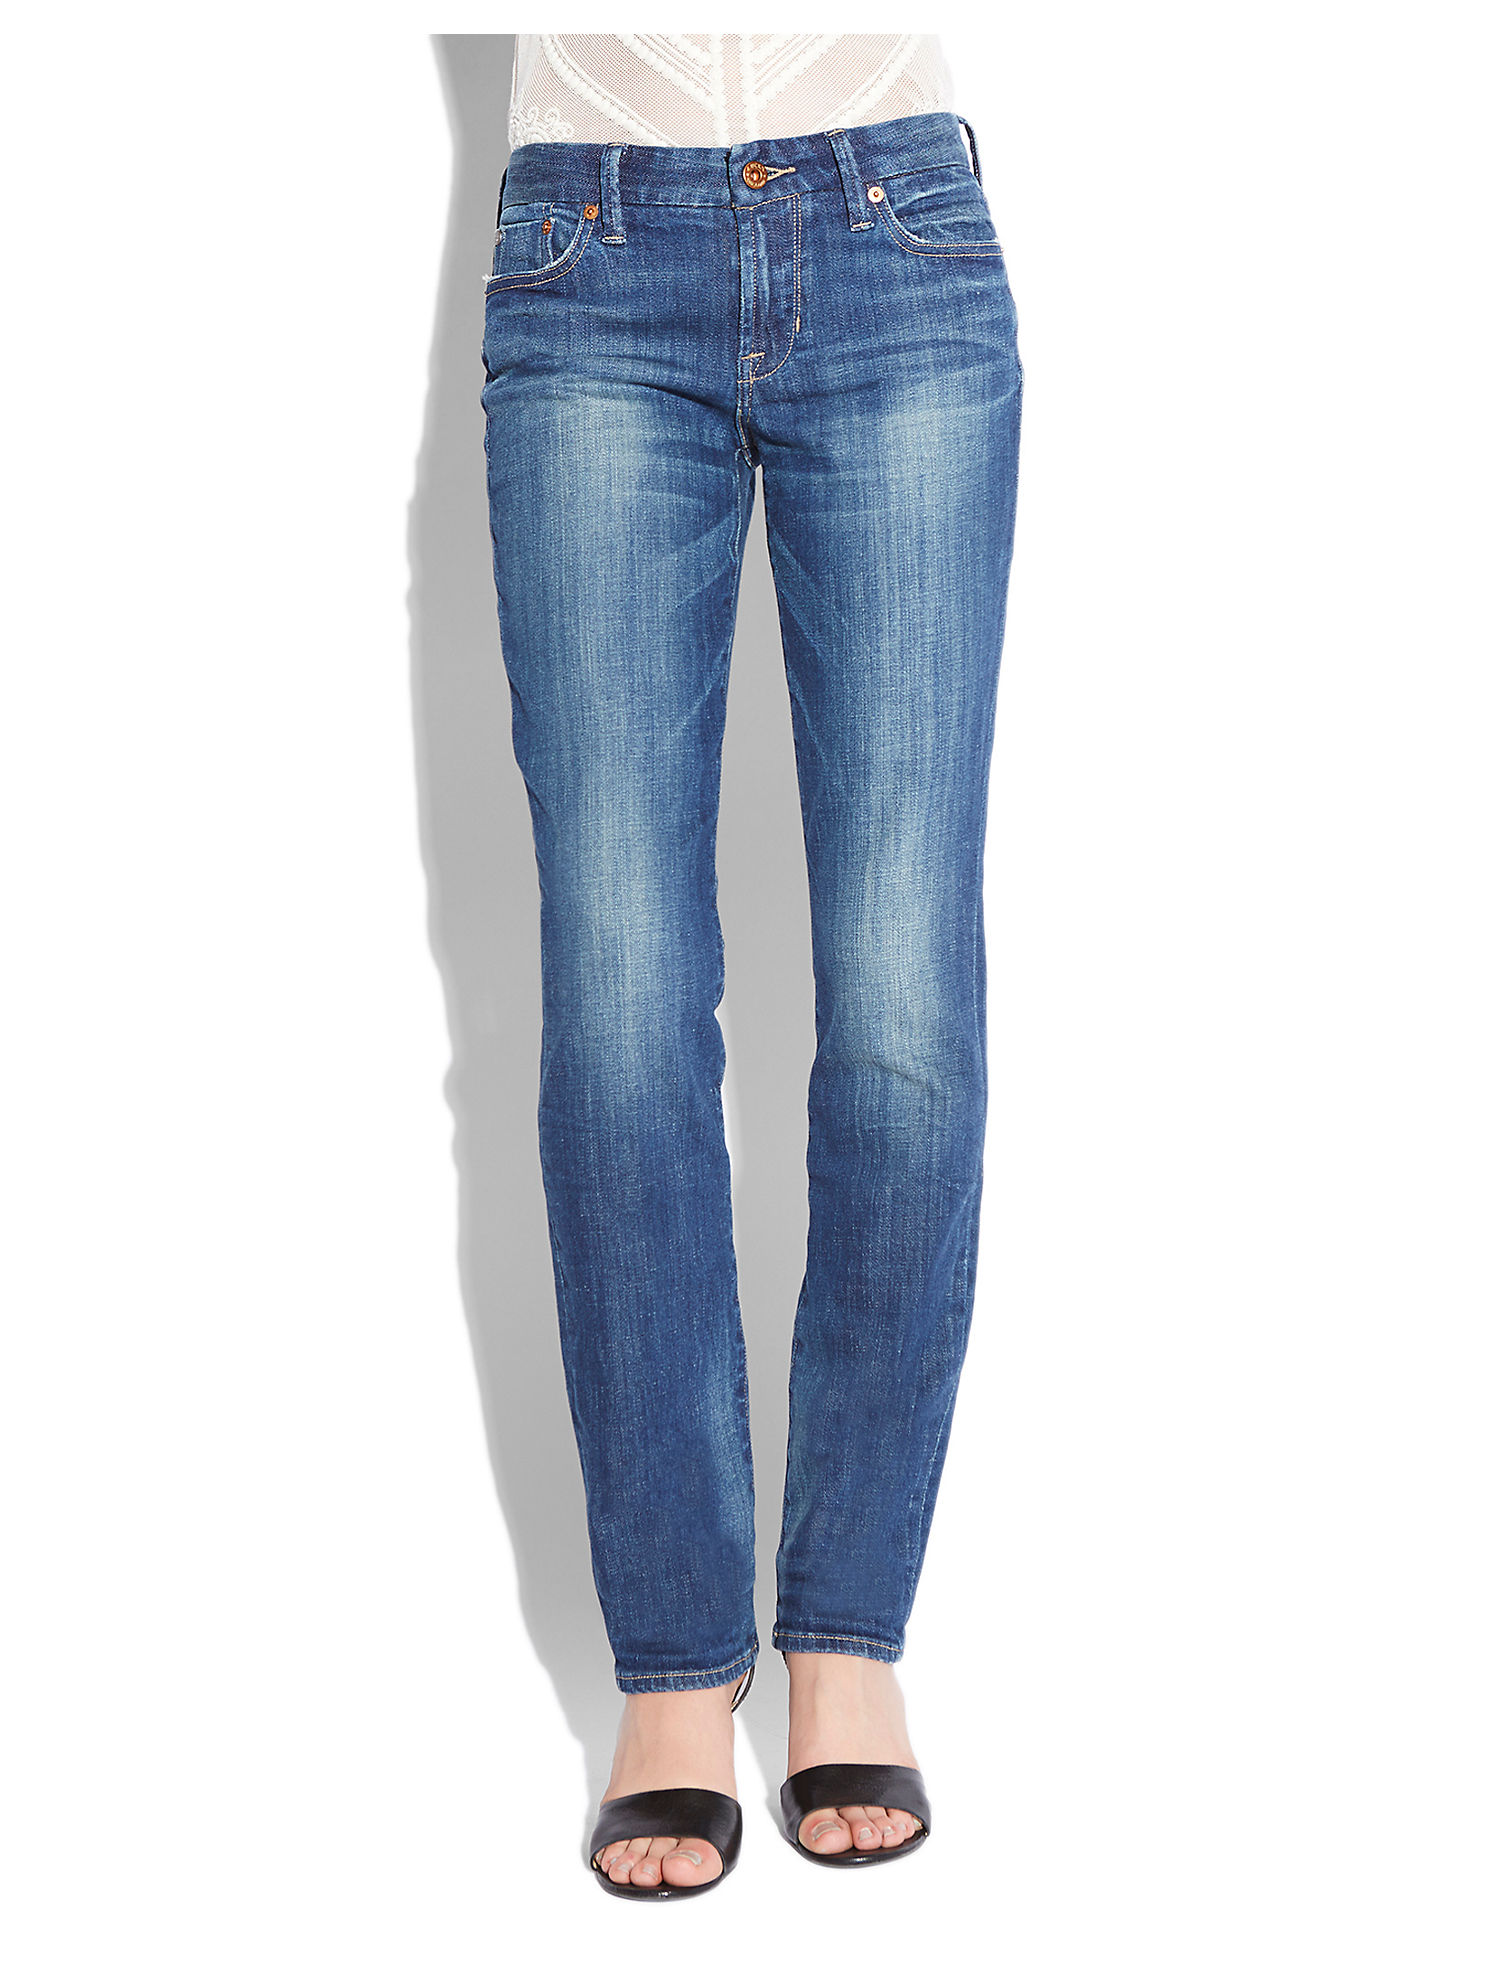 Discount Designer Jeans For Women | Extra 40% Off Sale Styles ...